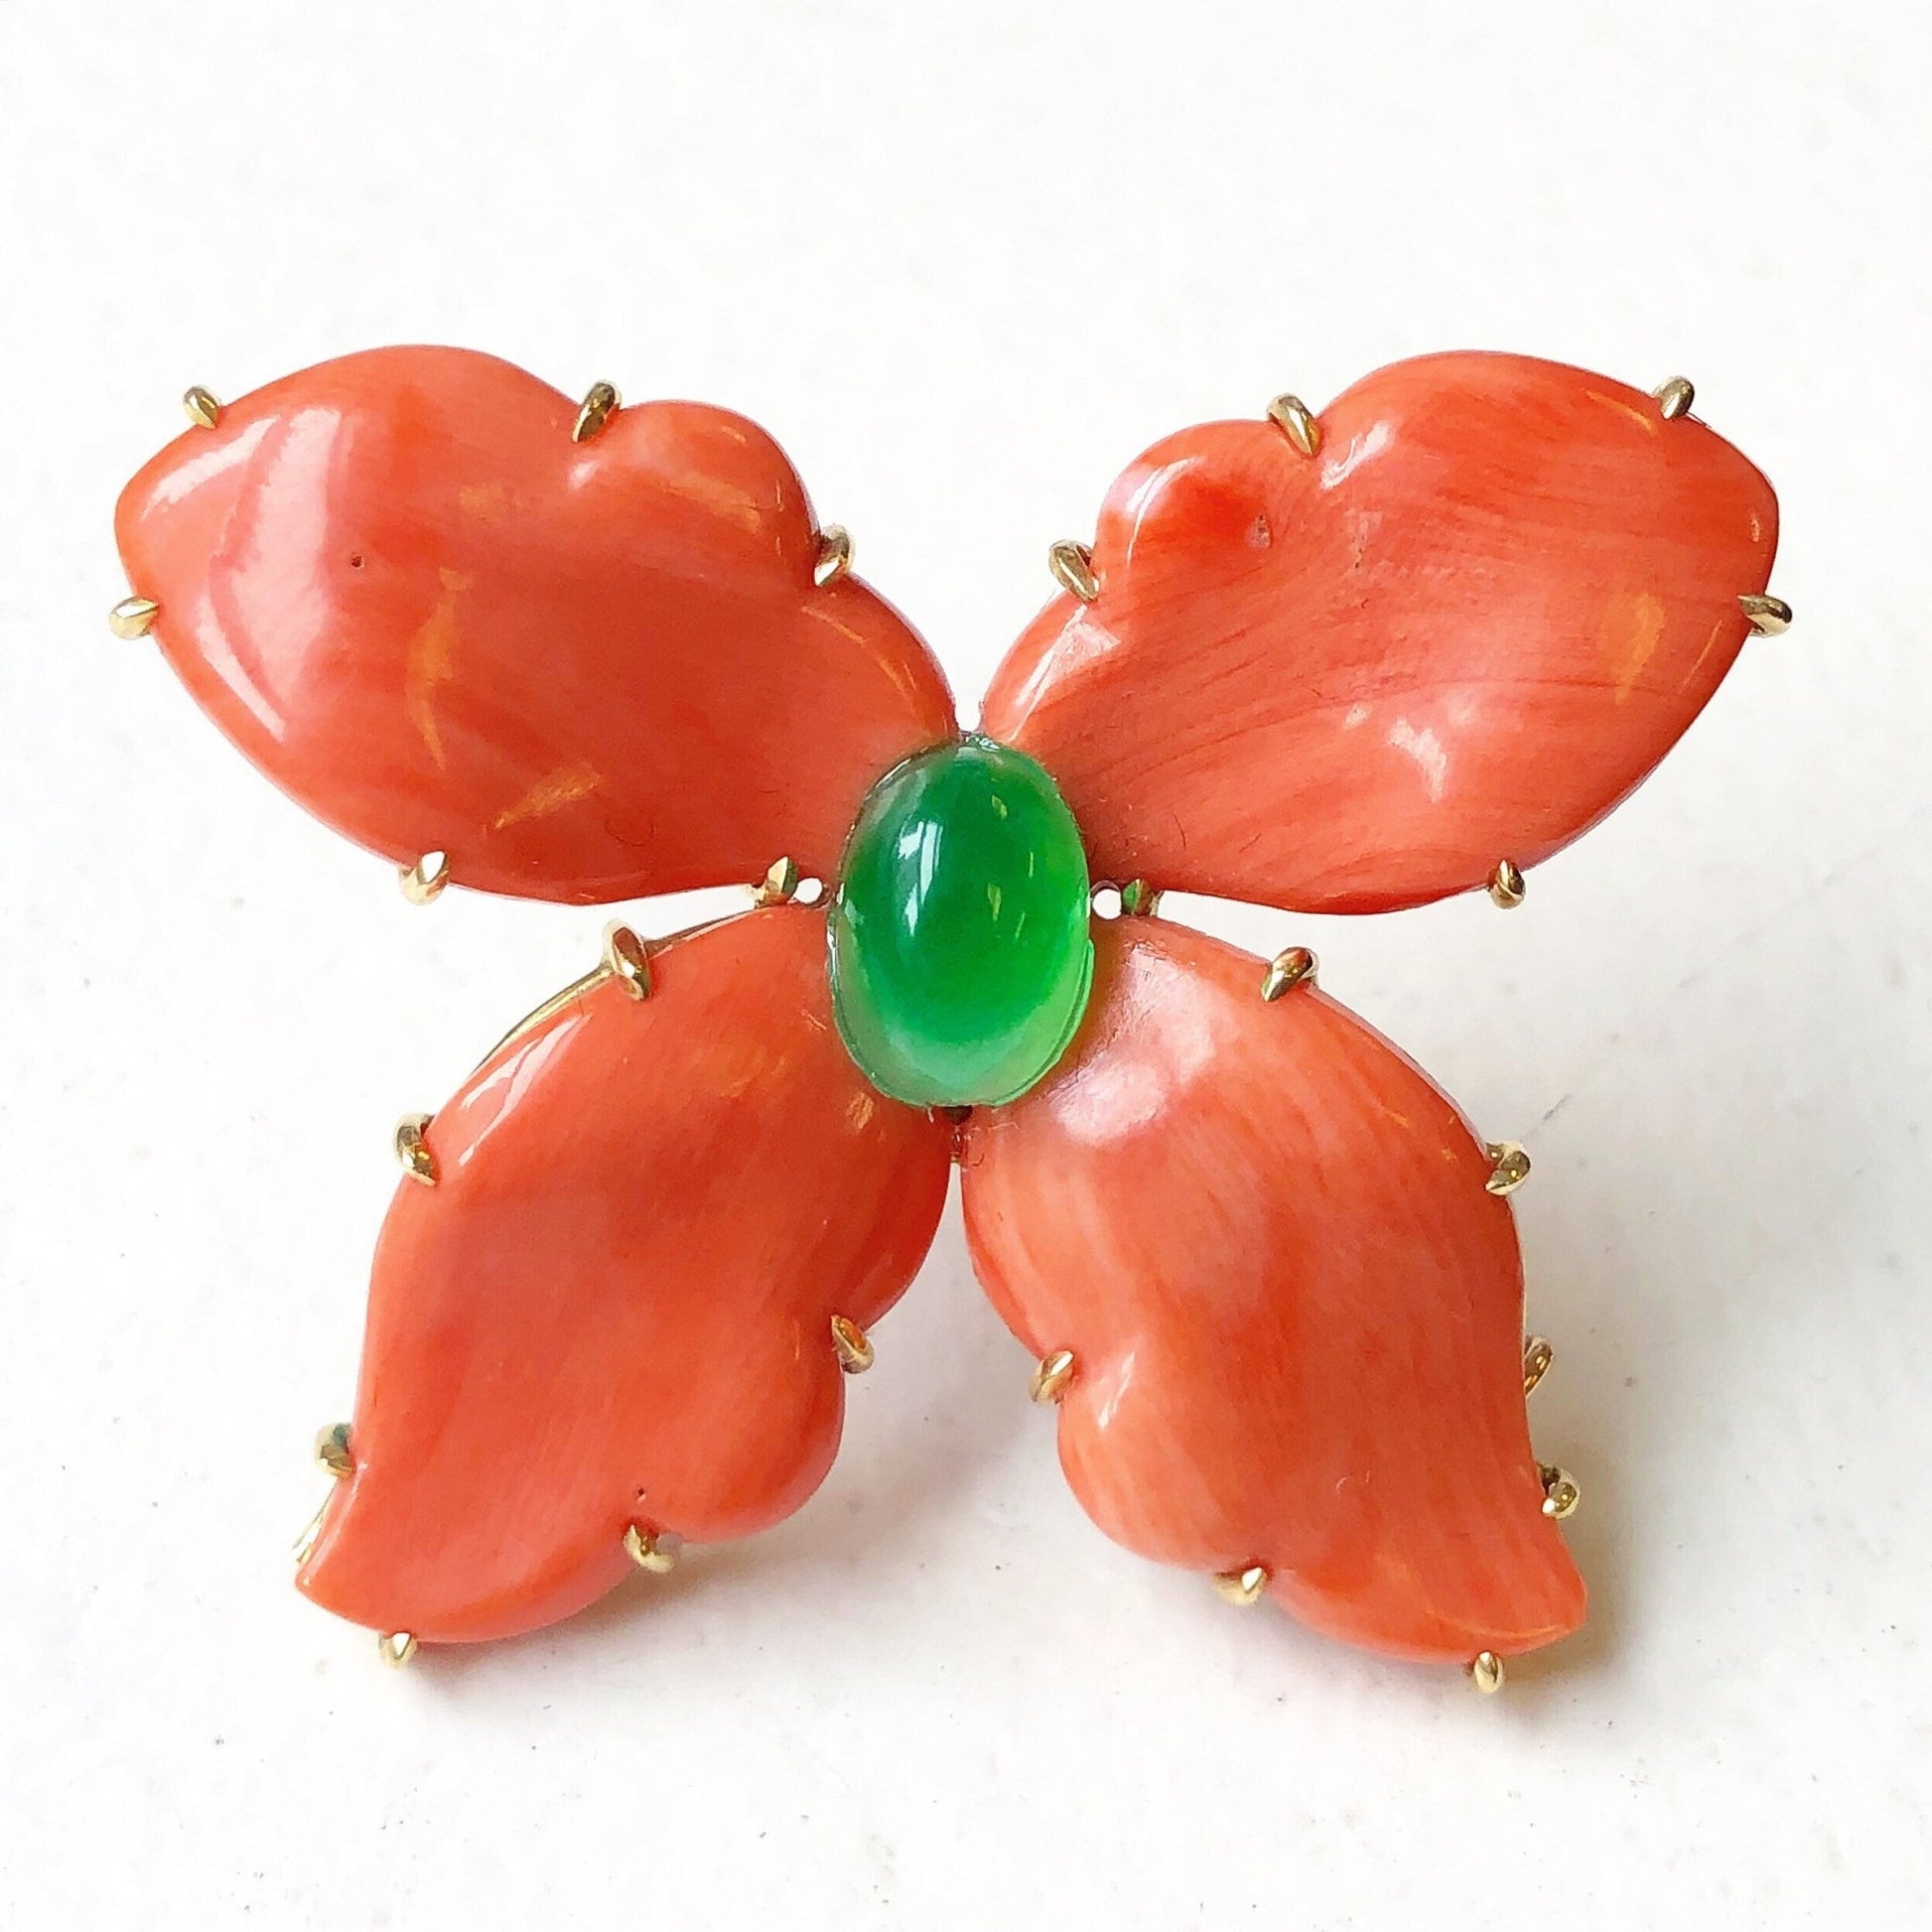 Very Fine 18 Karat Yellow Gold, Coral And Jadeite Brooch By Carvin French Jewelers - Birthday Gift - Jade Brooch - Green Jadeite